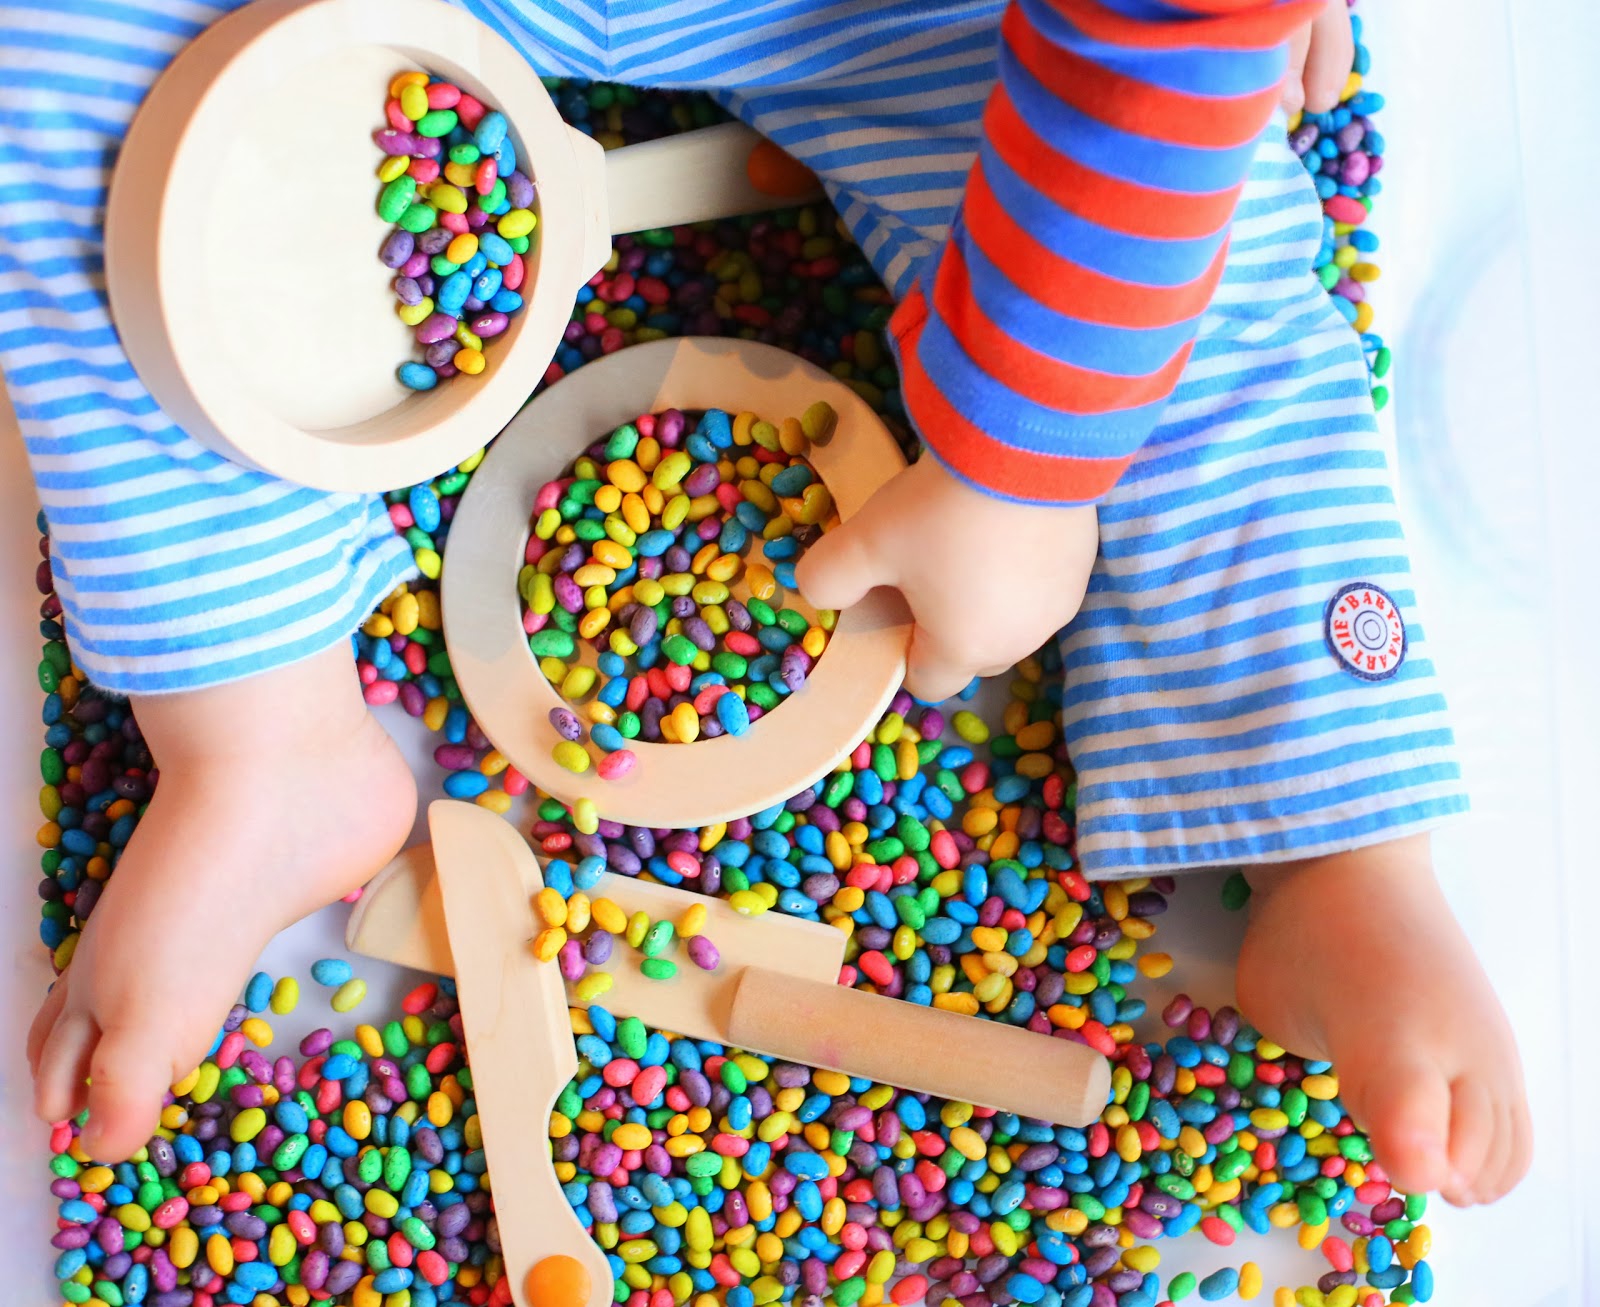 Baby in Jelly Beans shoot